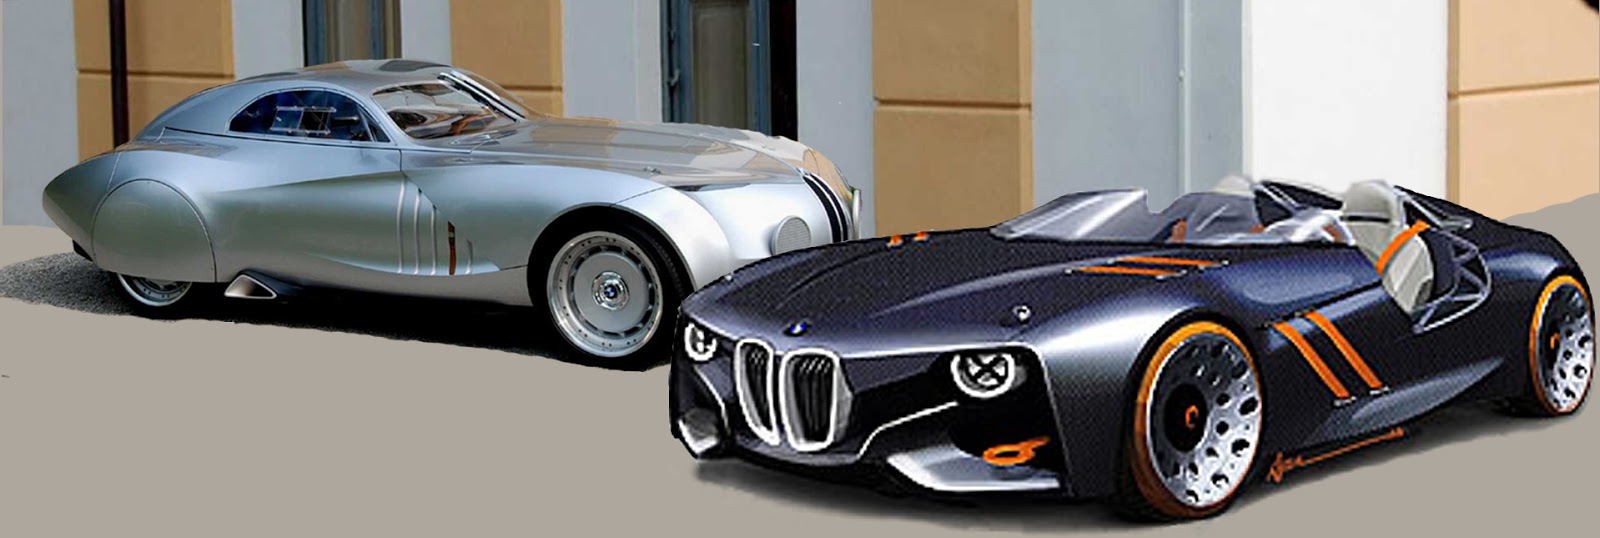 Here are some inspiring BMW concept cars